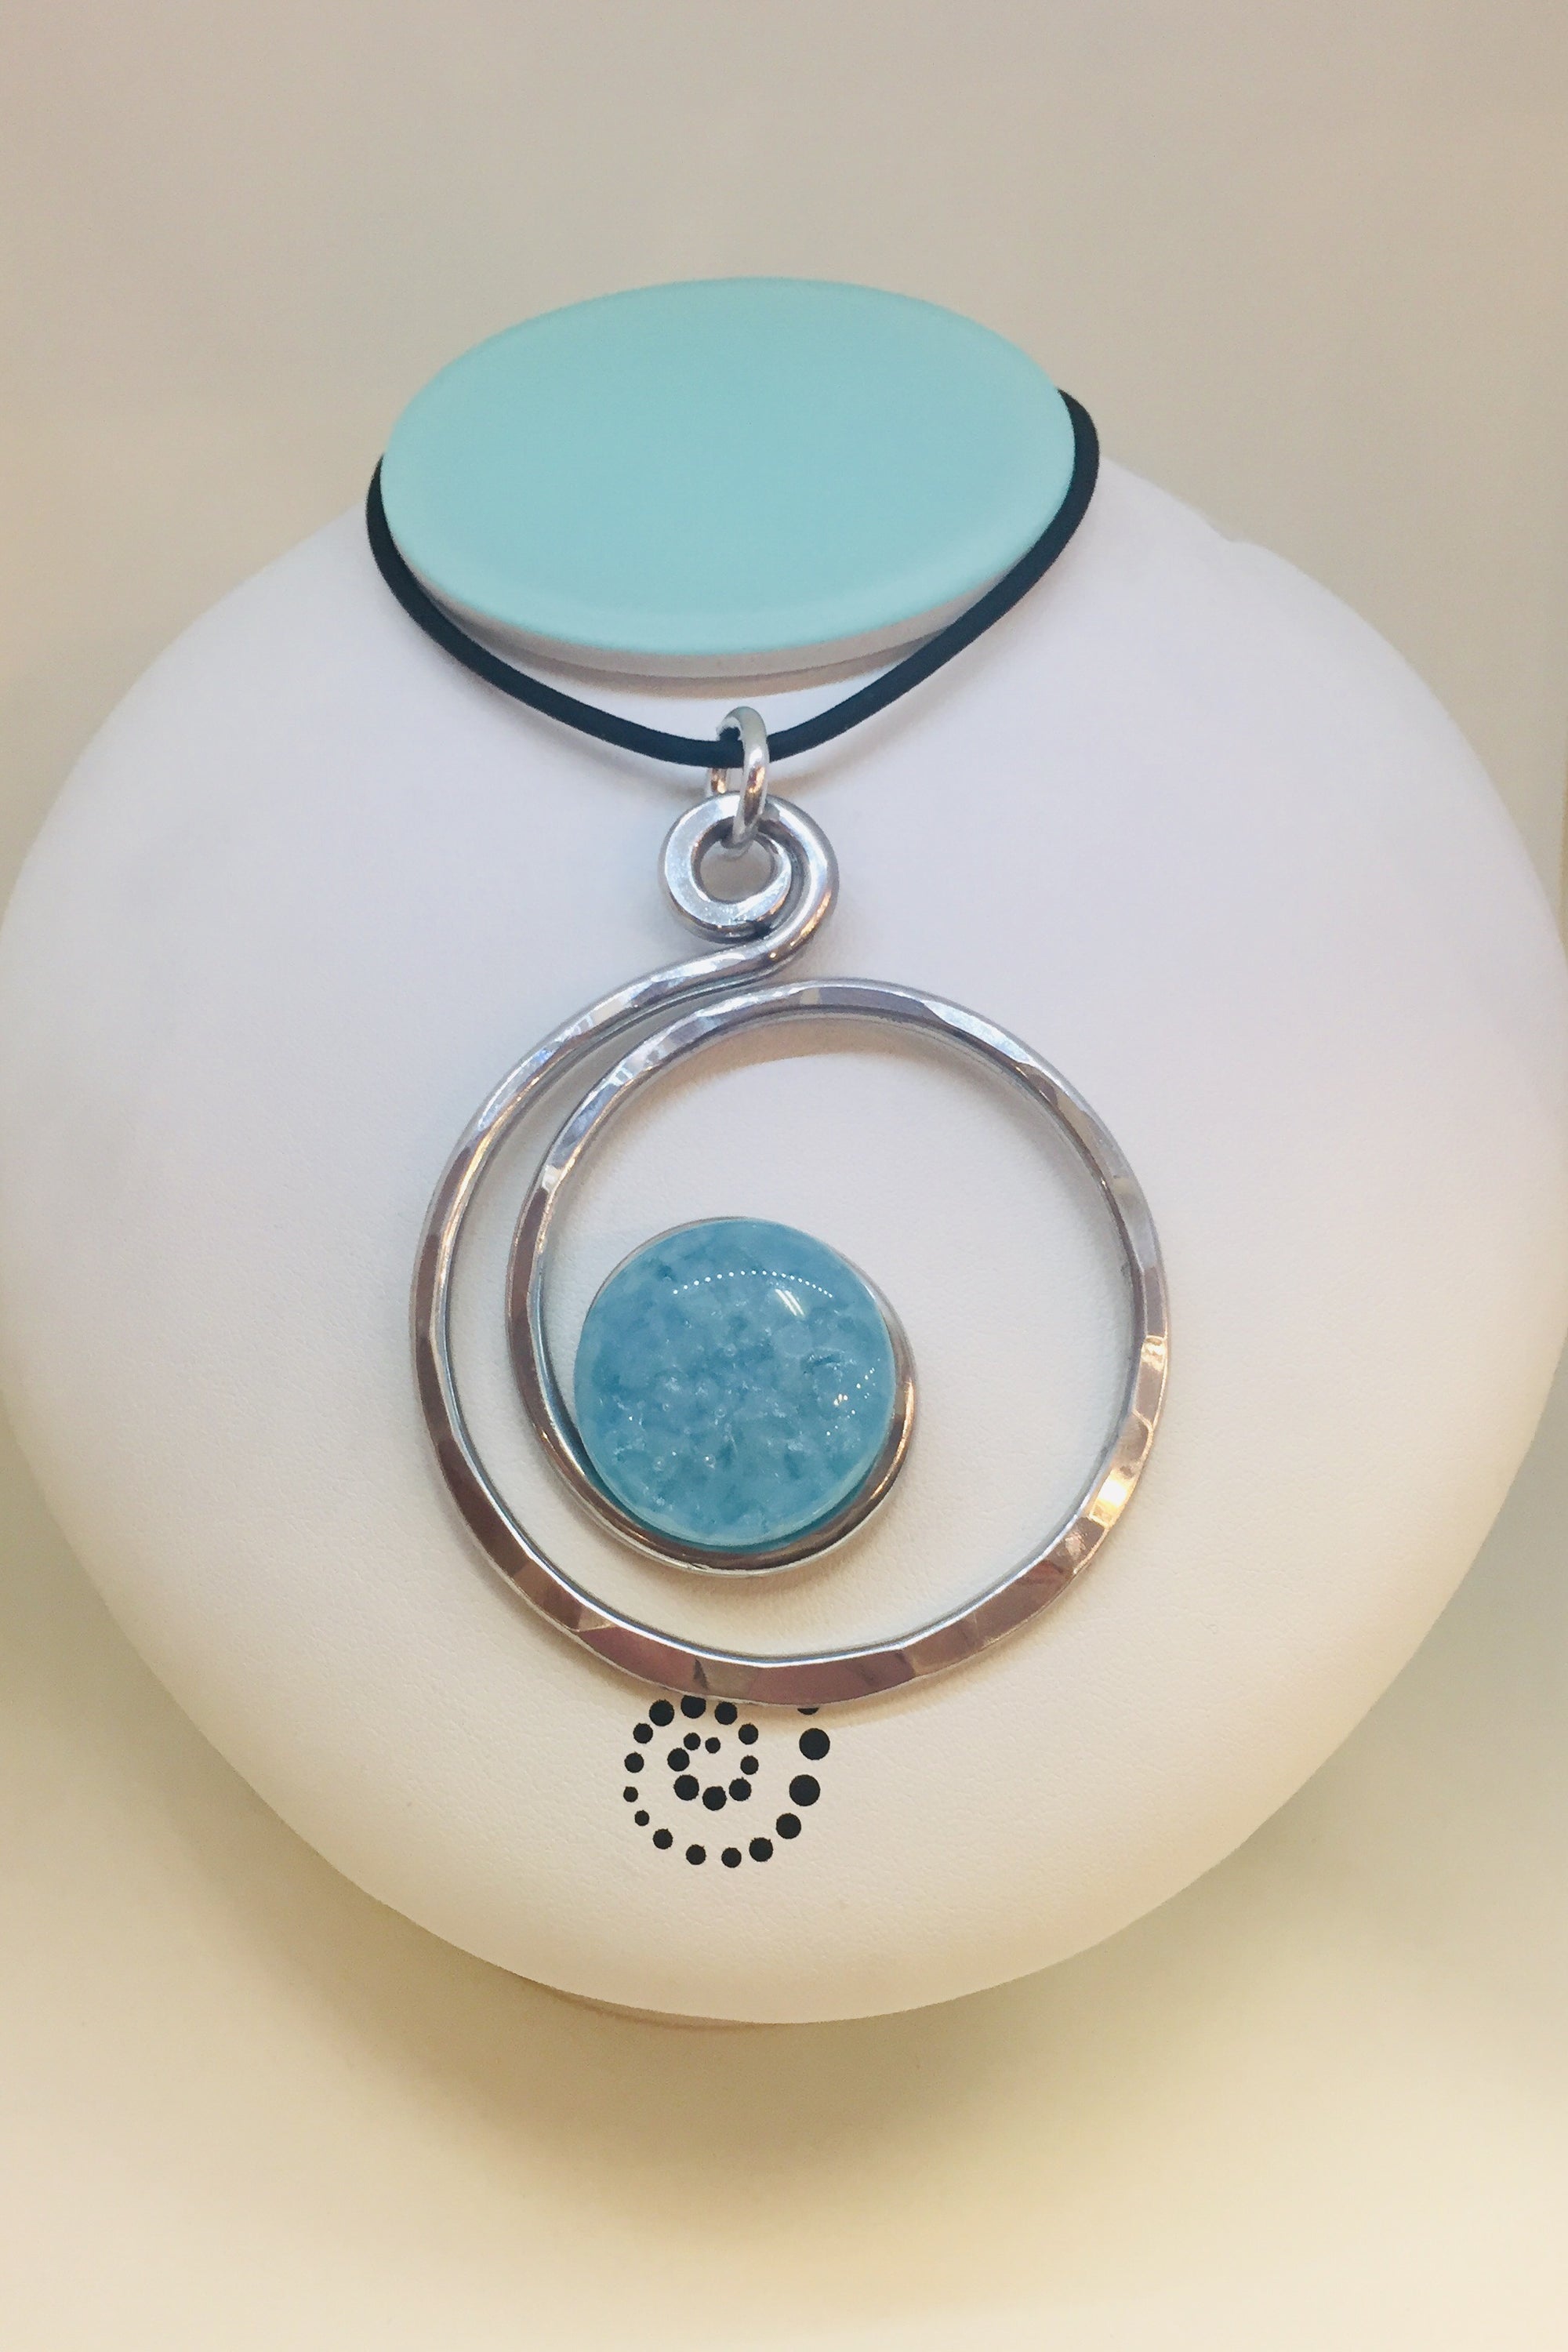 Curly Q Necklace with Light Blue Stone